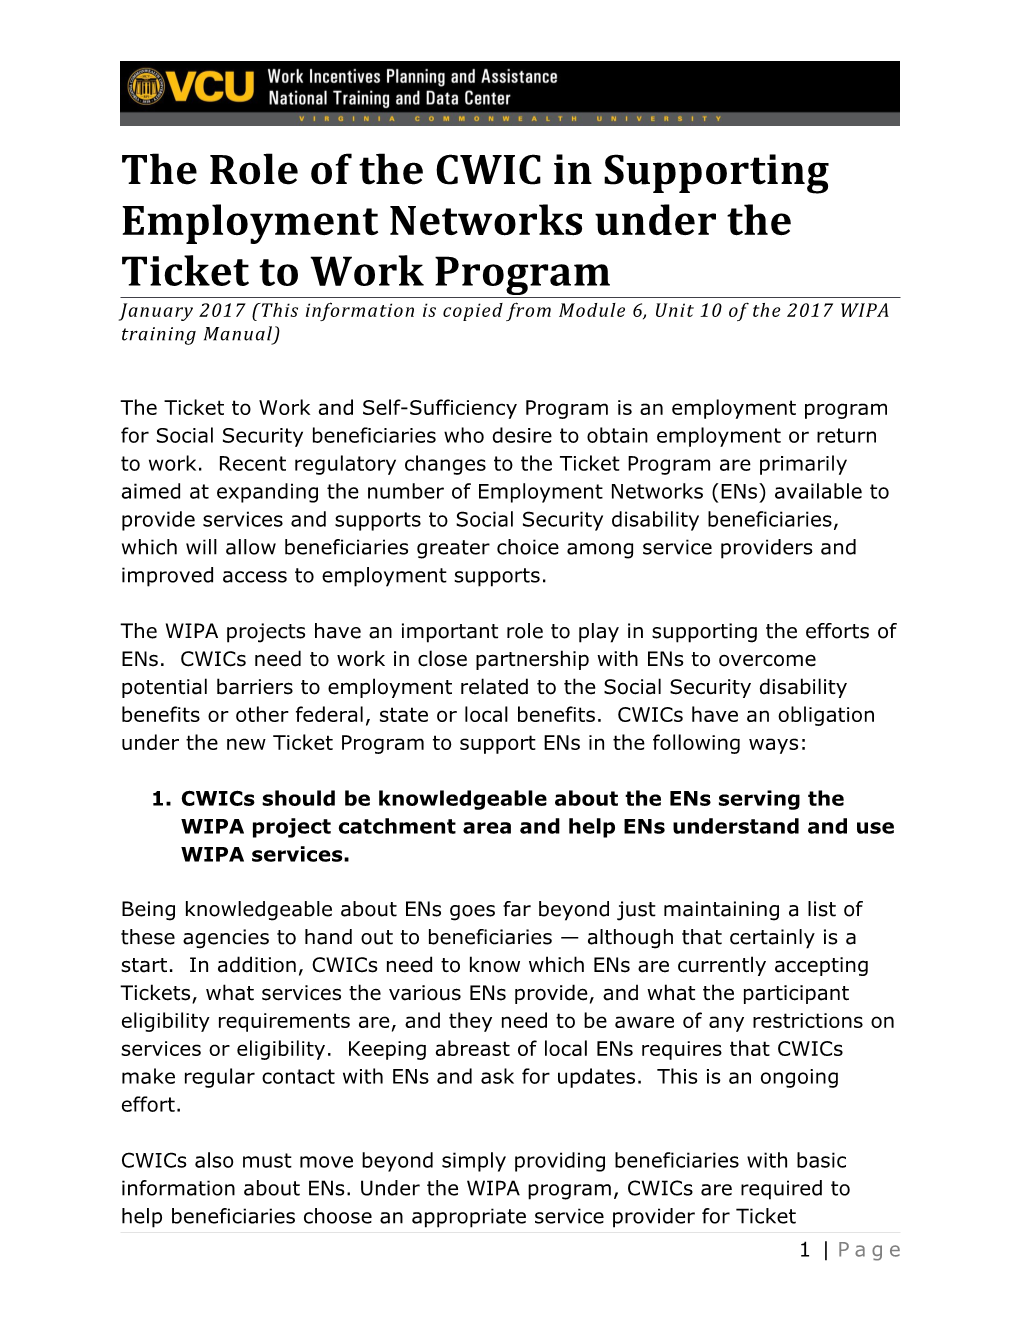 Role of the CWIC in Supporting Ens